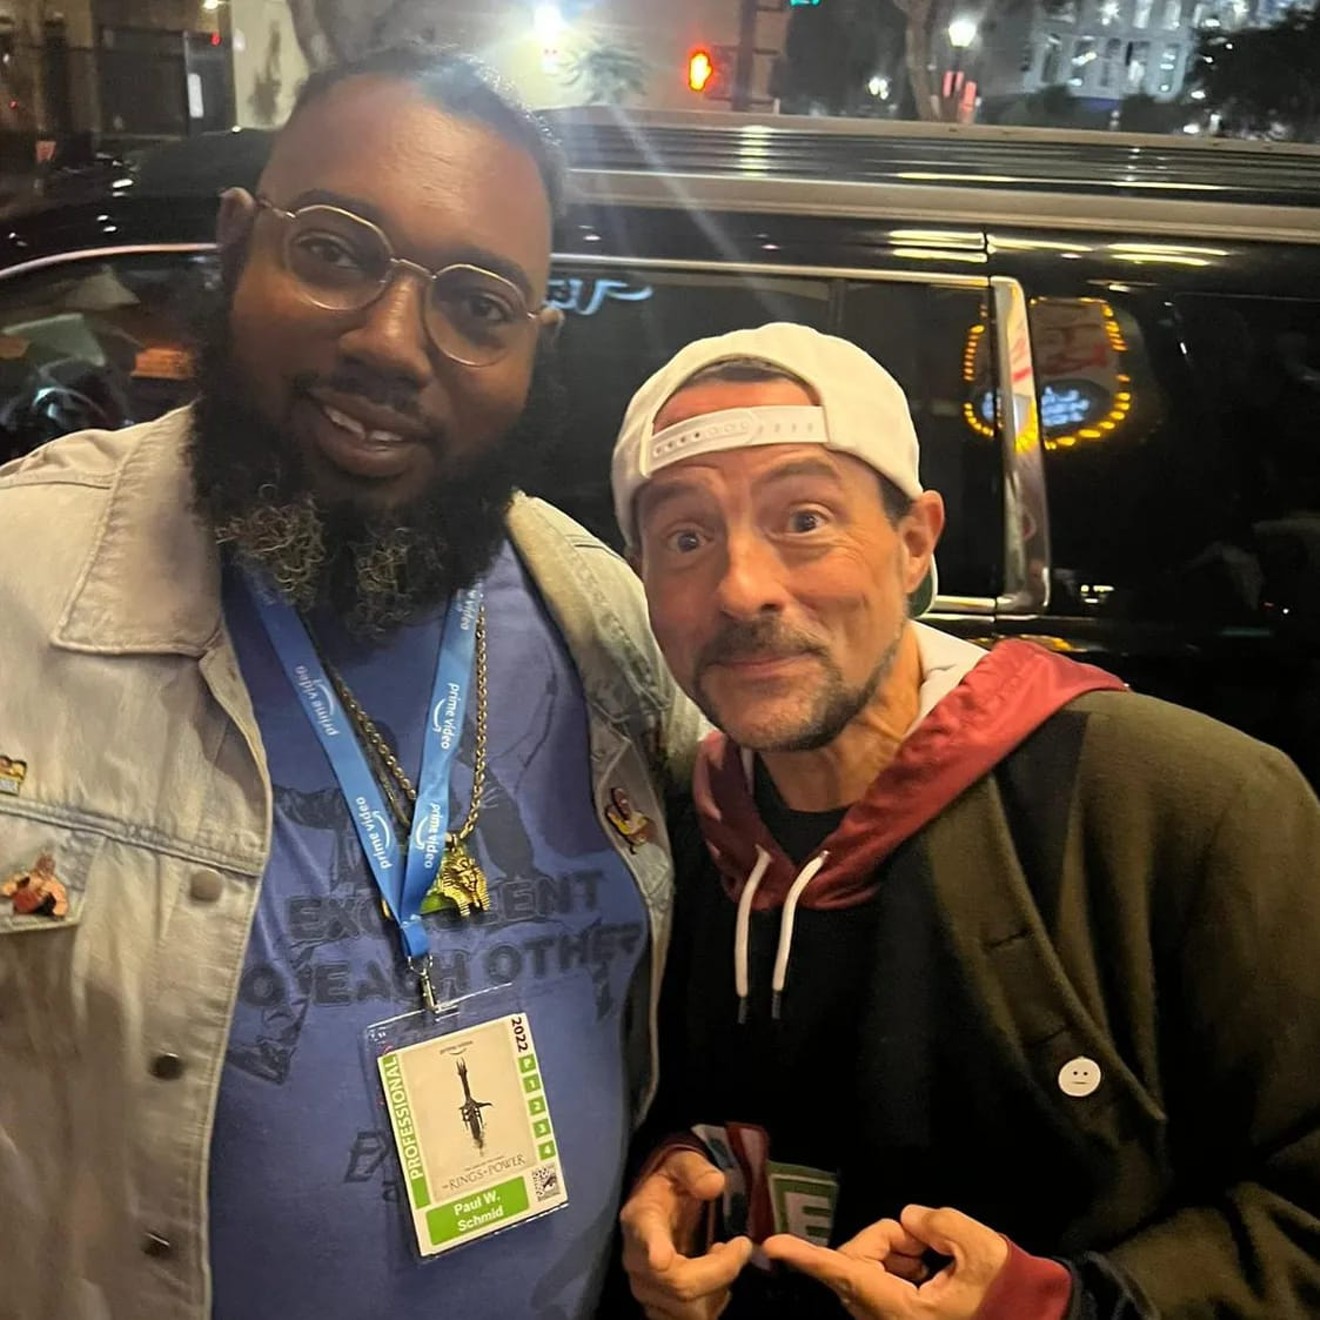 Teek Hall: "This was also on my bucket list to meet with Kevin Smith (right)."